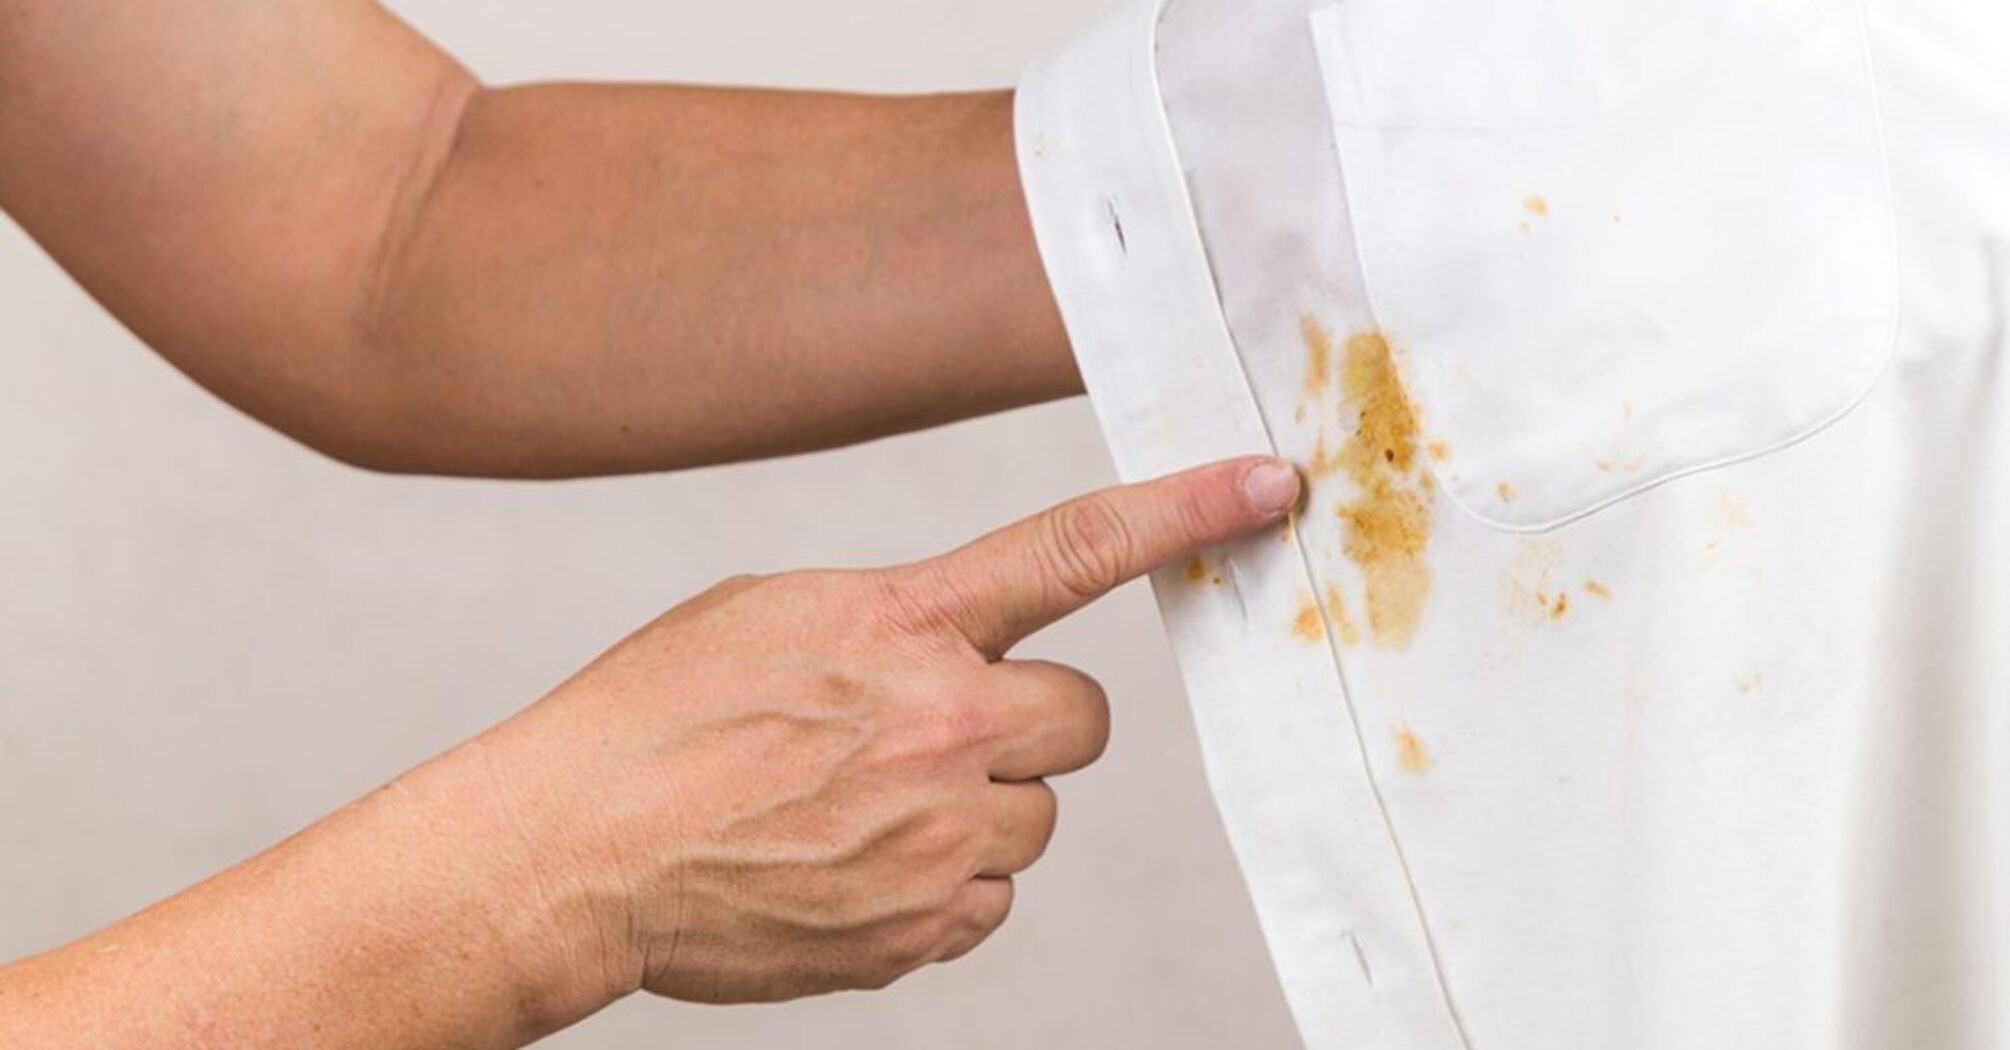 How to remove yellow stains from a shirt 